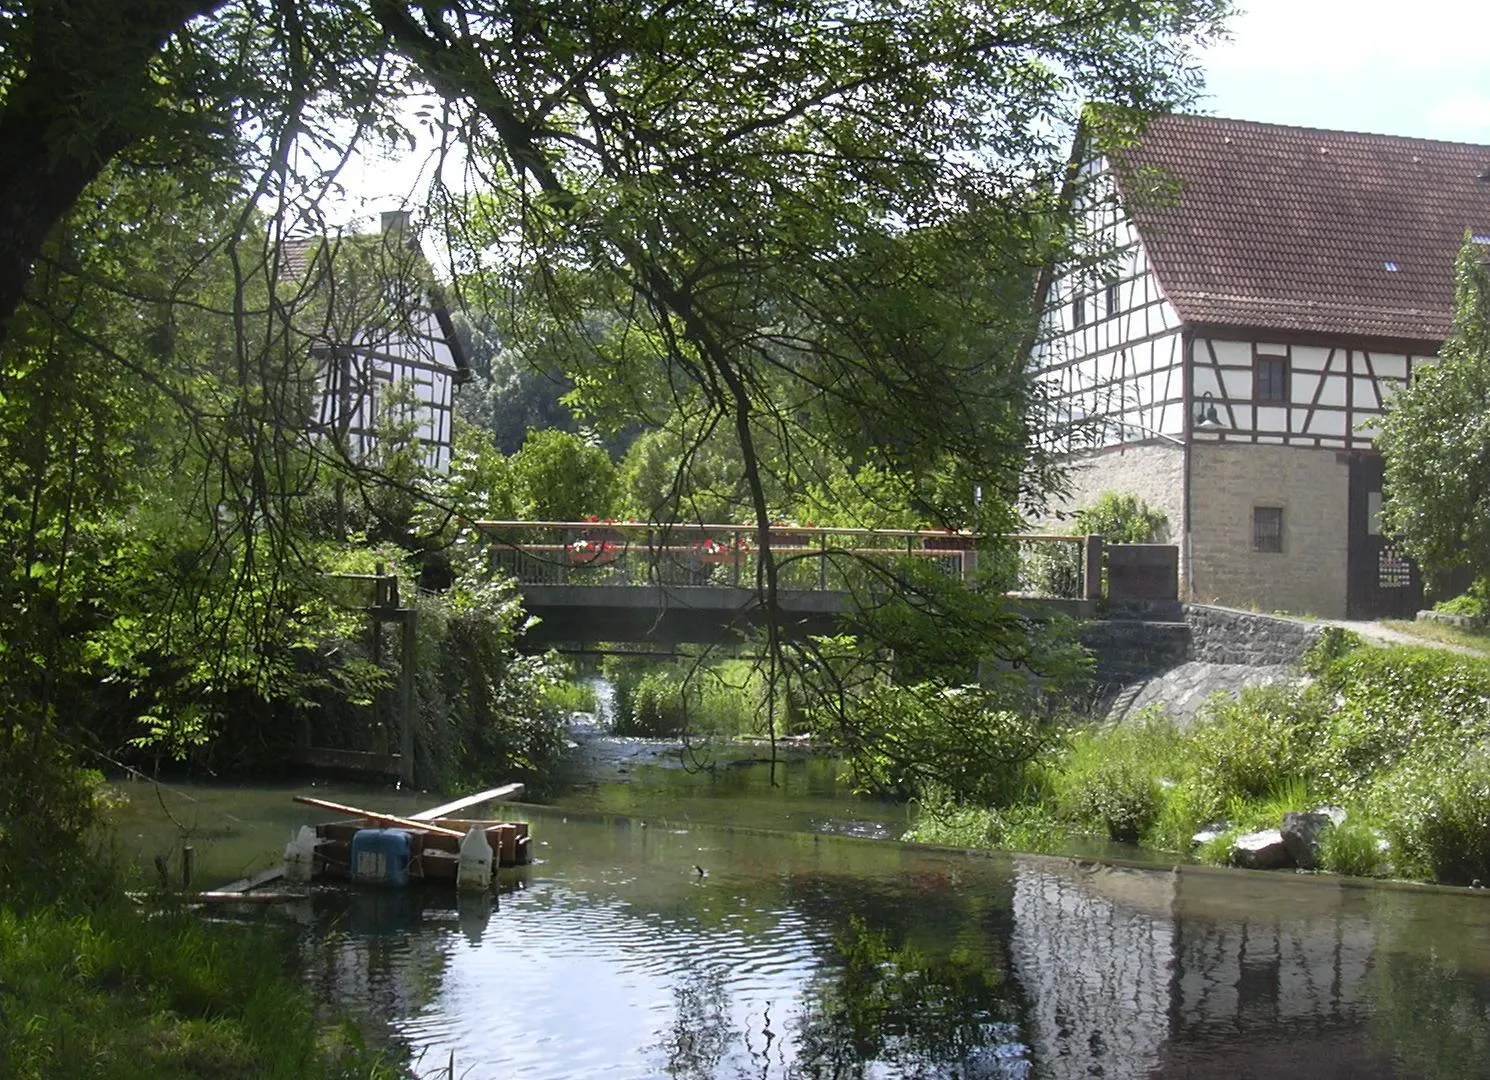 Photo showing: The small river Kessach in the village of Unterkessach, Germany